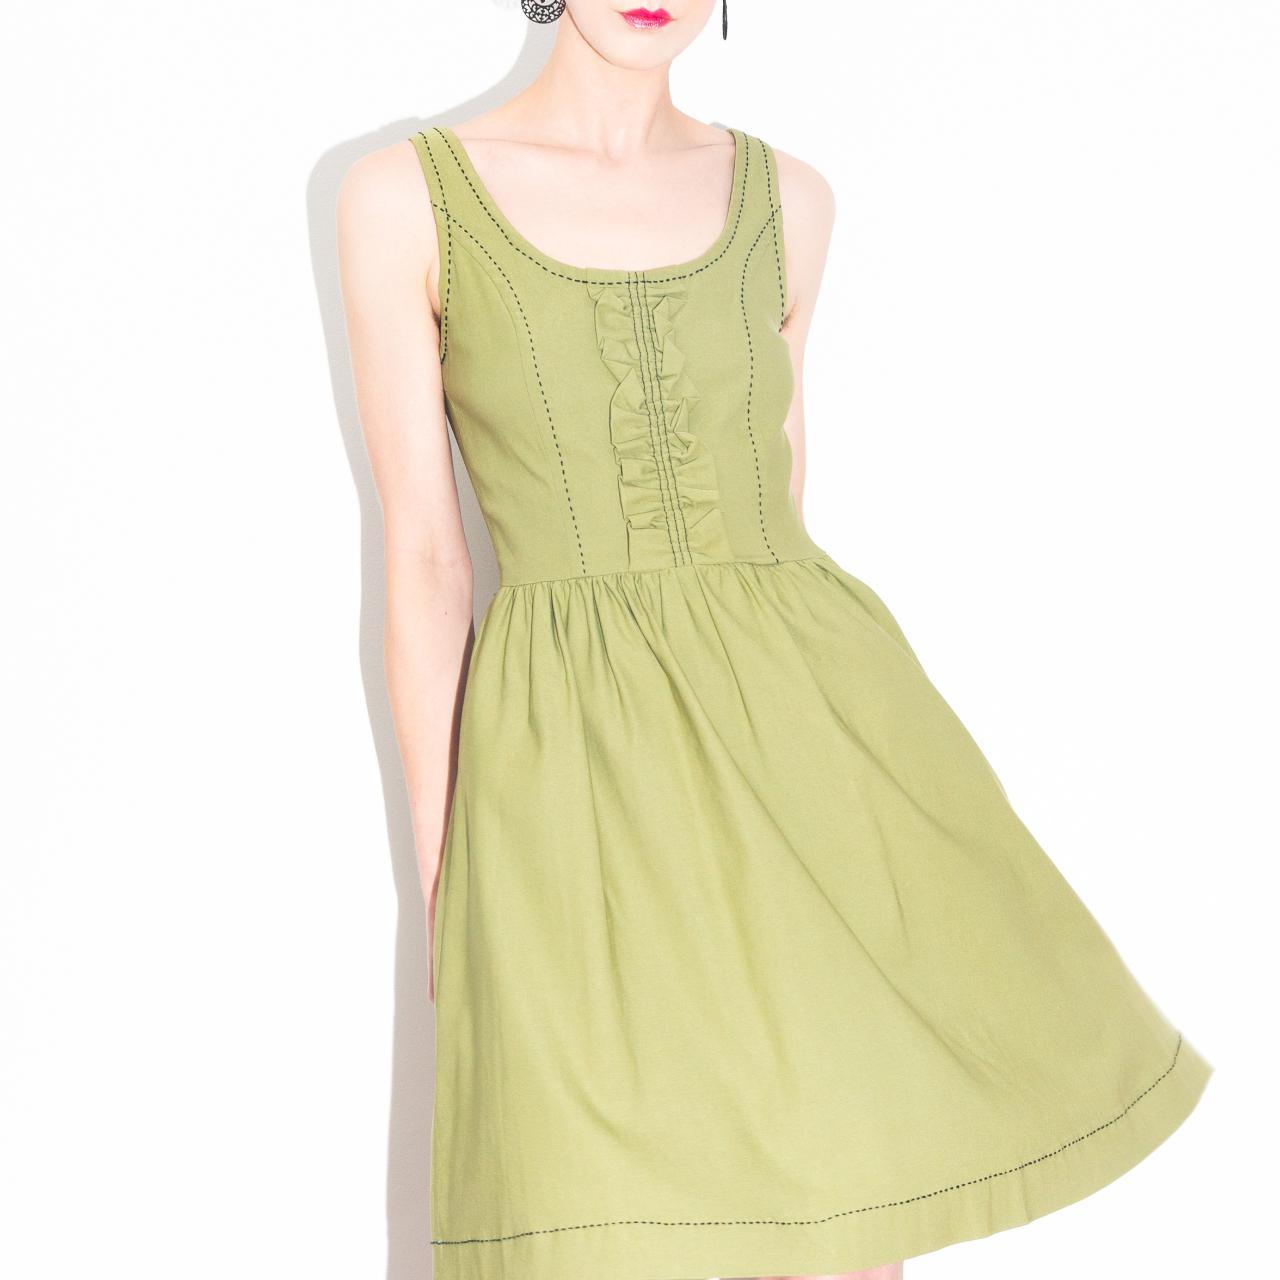 Product Image 2 - Adorable olive/army green fit and